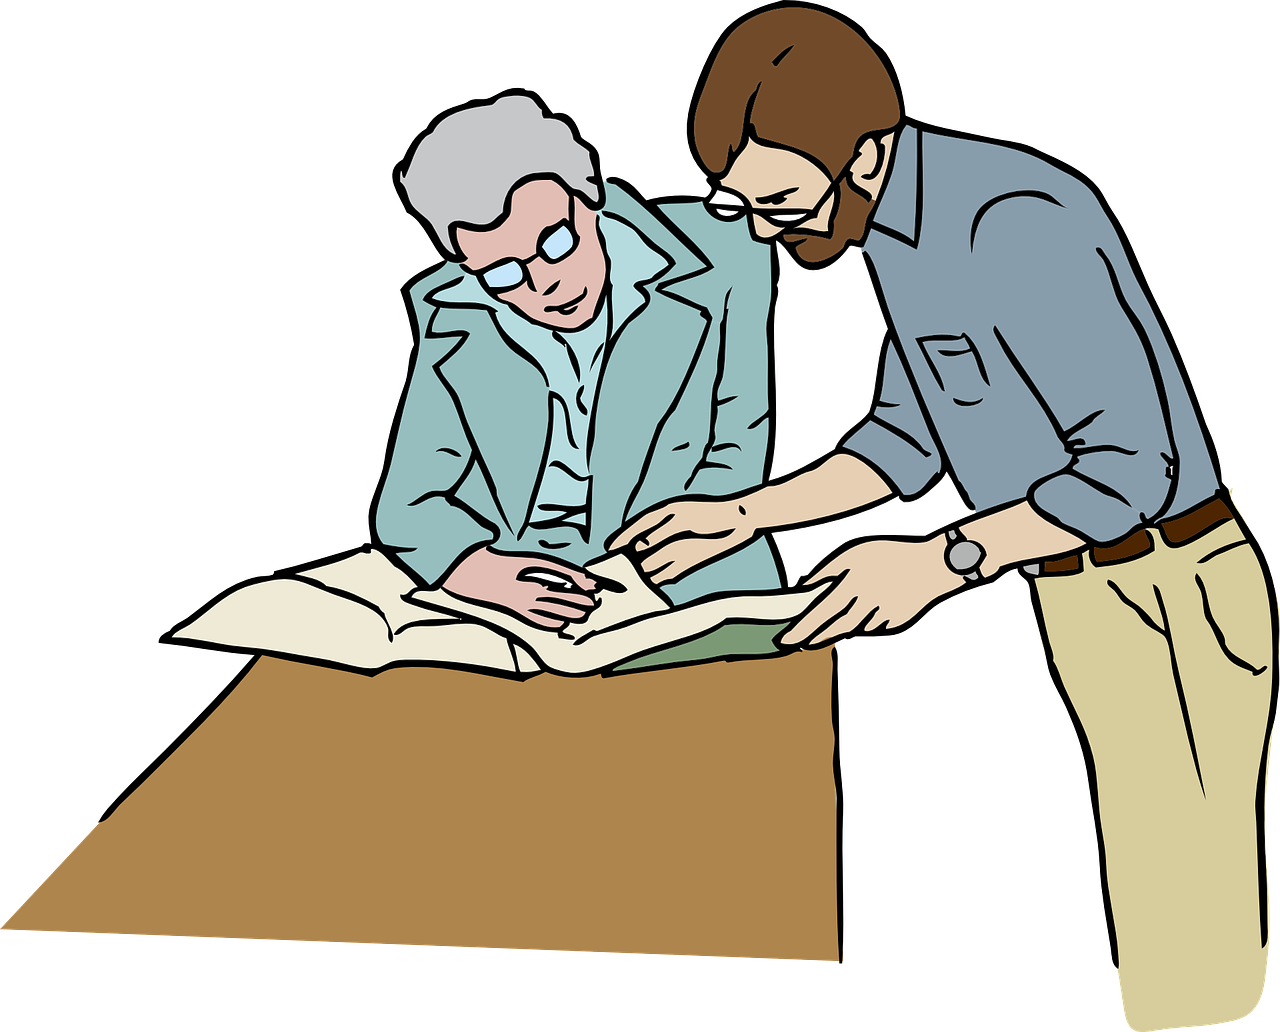 Two individuals standing around a desk and researching through books.